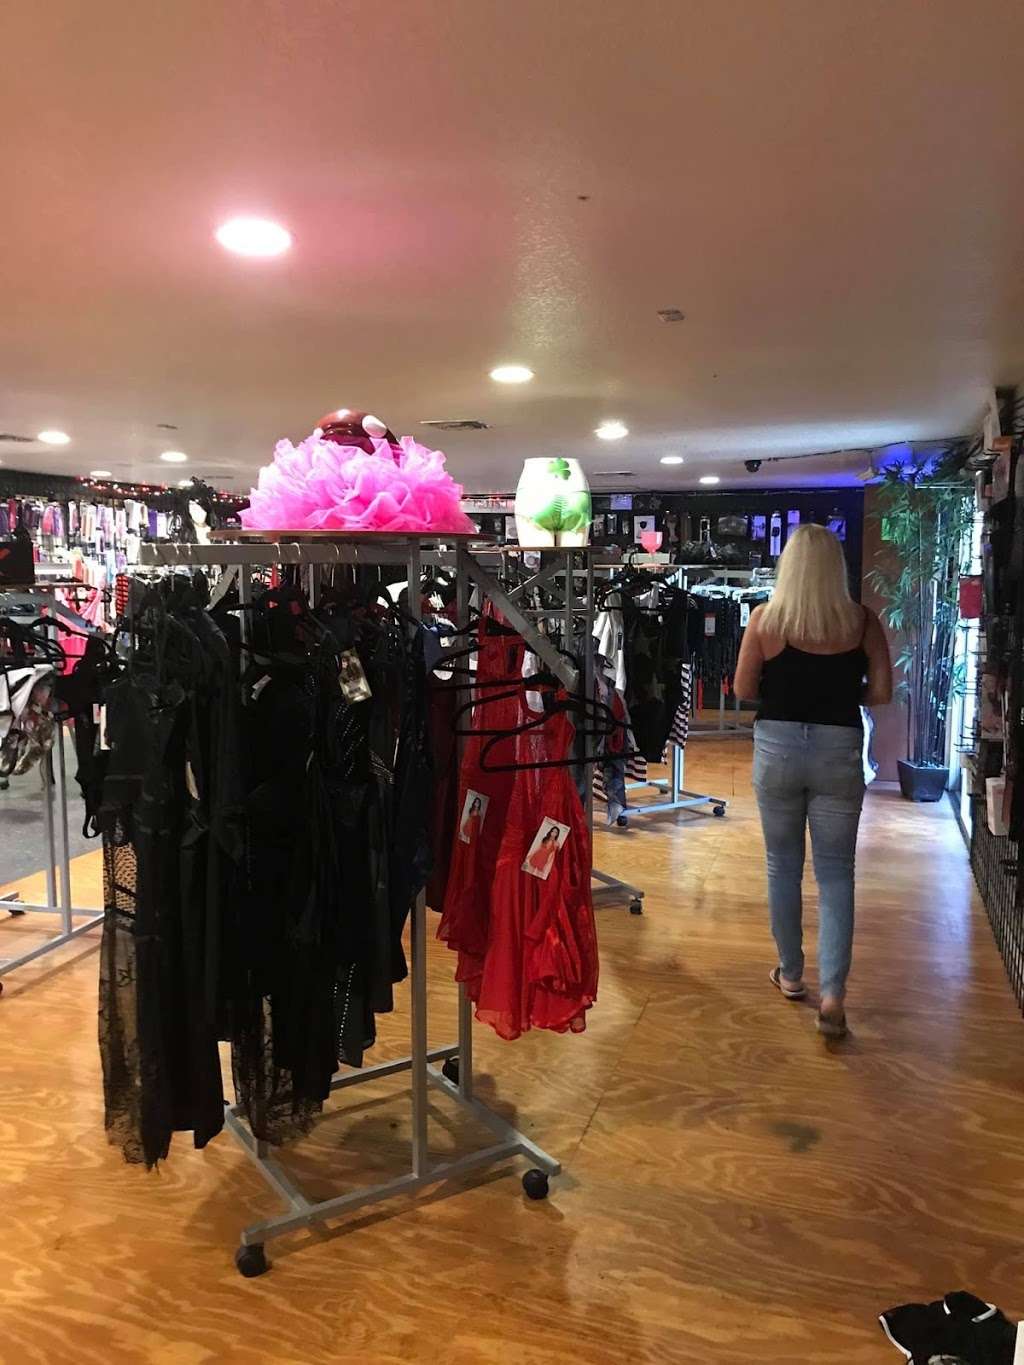 Wild Things Lingerie & Adult Novelty Store - clothing store  | Photo 8 of 9 | Address: 5340 E Silver Springs Blvd, Silver Springs, FL 34488, USA | Phone: (352) 236-5298